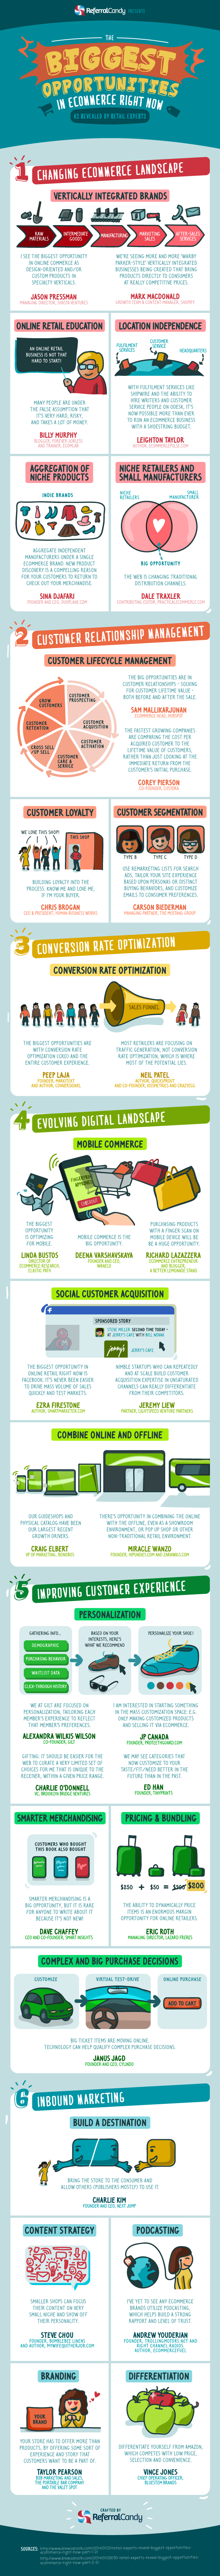 biggest ecommerce opportunities infographic